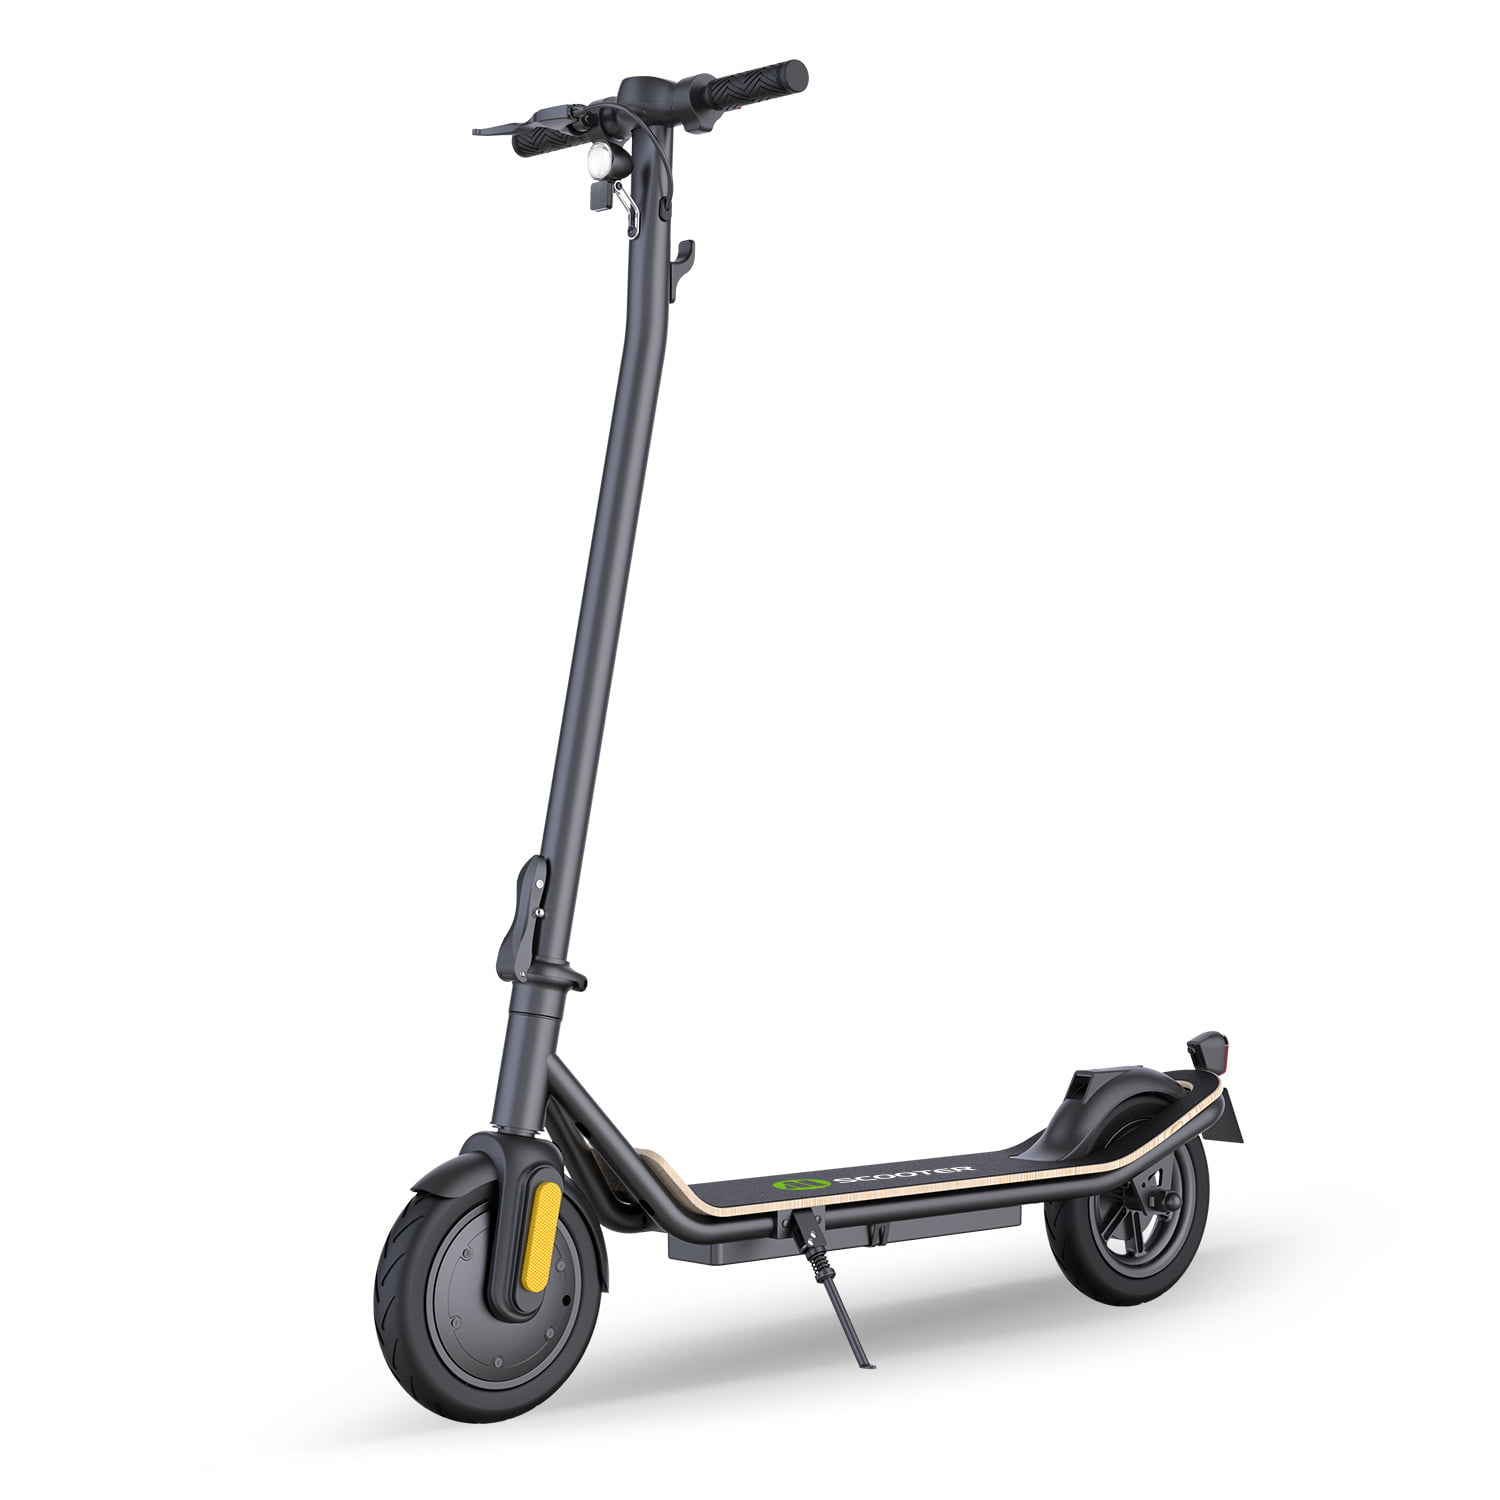 MEGAWHEELS ELECTRIC SCOOTER FOLDING KICK E-SCOOTER 250W ALUMINUM ADULT SCOOTER 